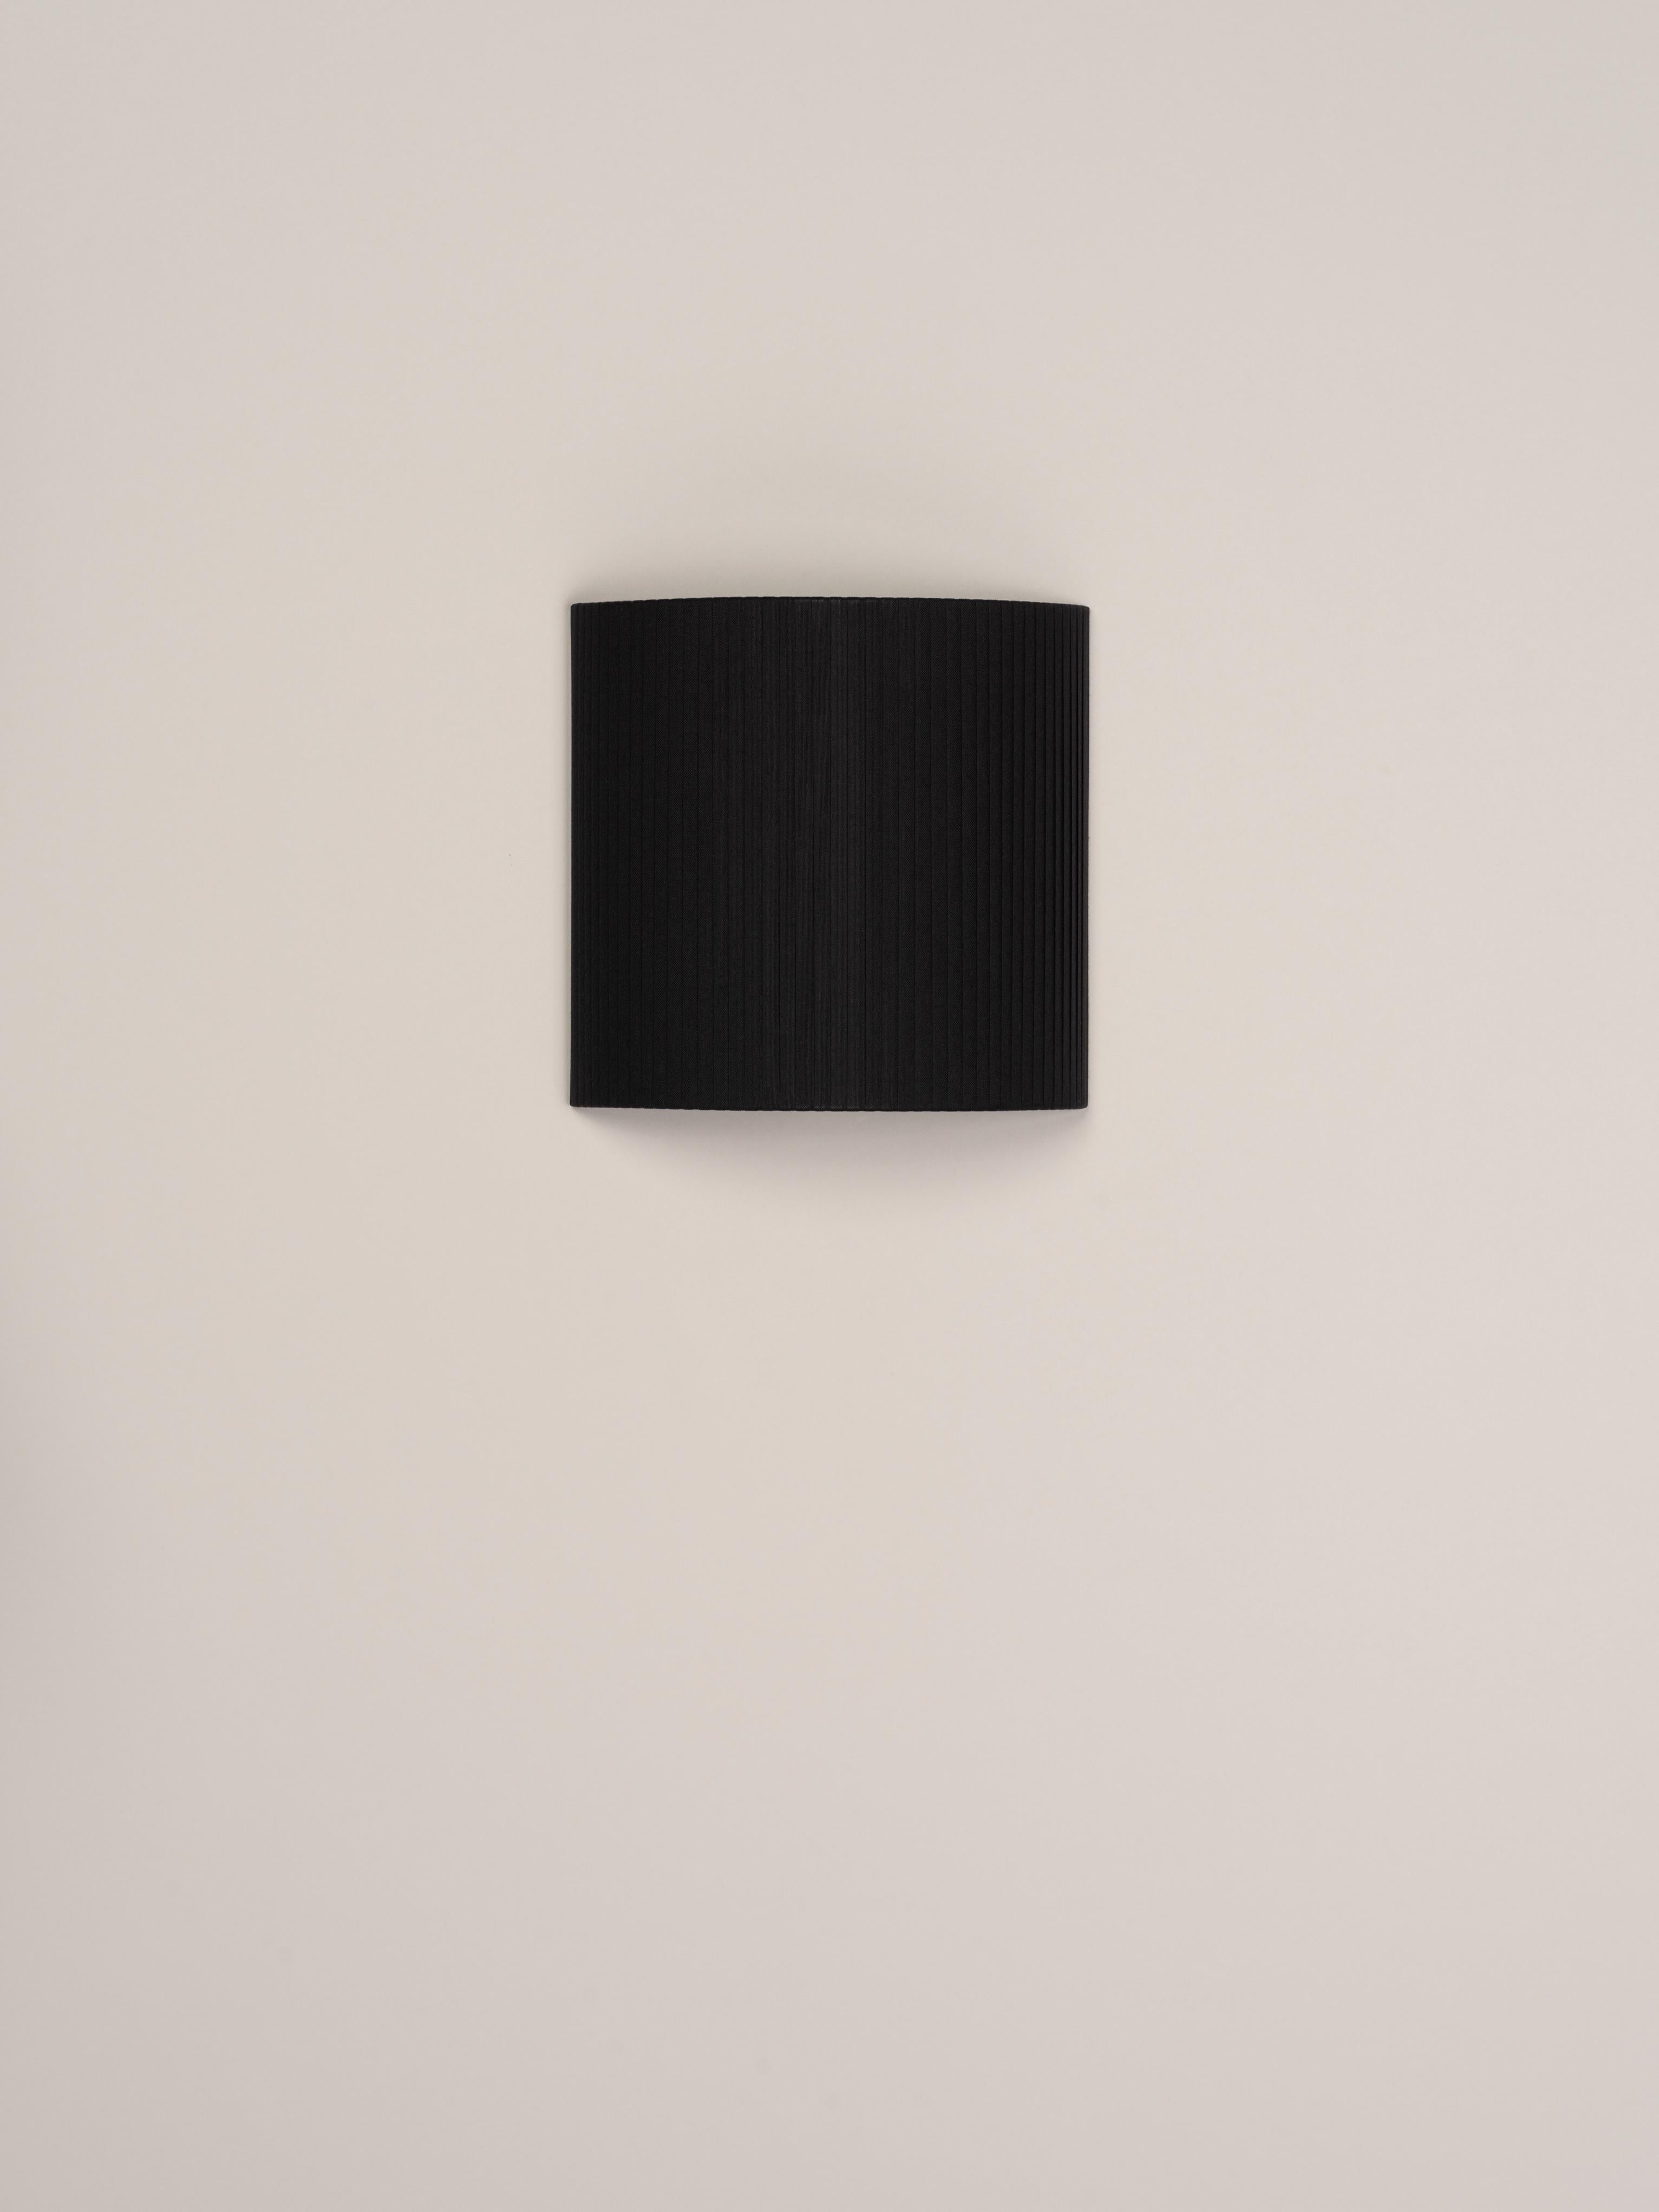 Black comodín cuadrado wall lamp by Santa & Cole
Dimensions: D 31 x W 13 x H 30 cm
Materials: Metal, ribbon.

This minimalist wall lamp humanises neutral spaces with its colourful and functional sobriety. The shade is fondly hand-ribboned, piece